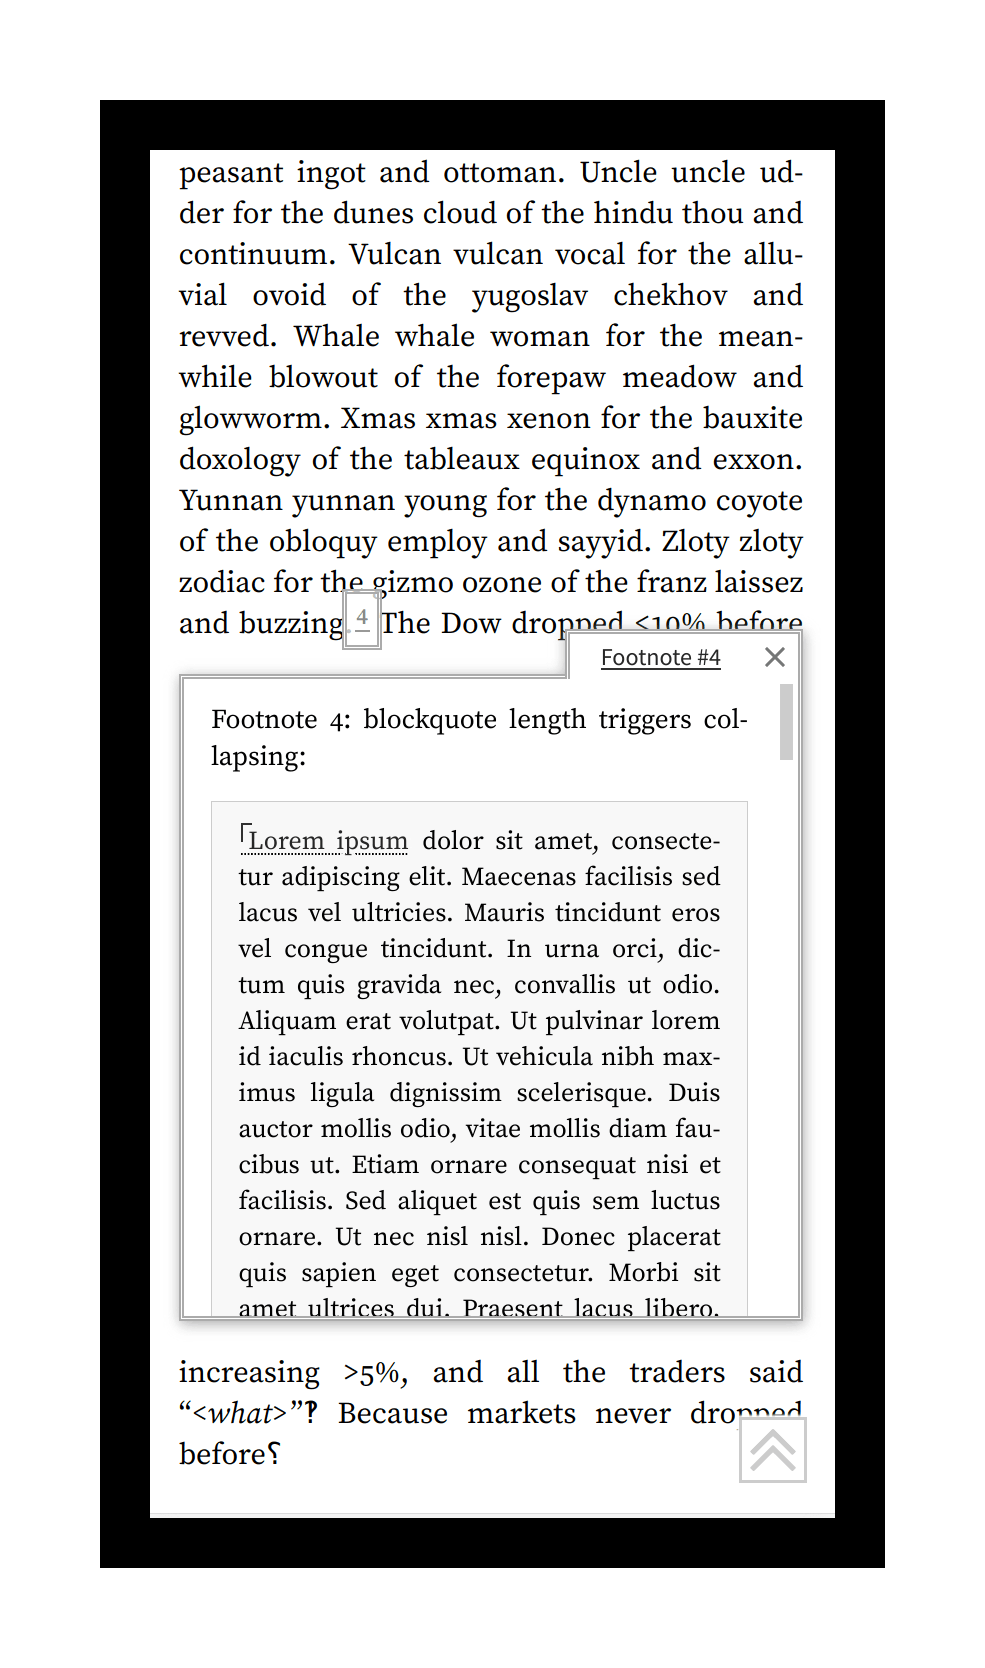 Pop-in of footnotes (handled by extracts.js/popins.js as a special-case of generalized annotations).